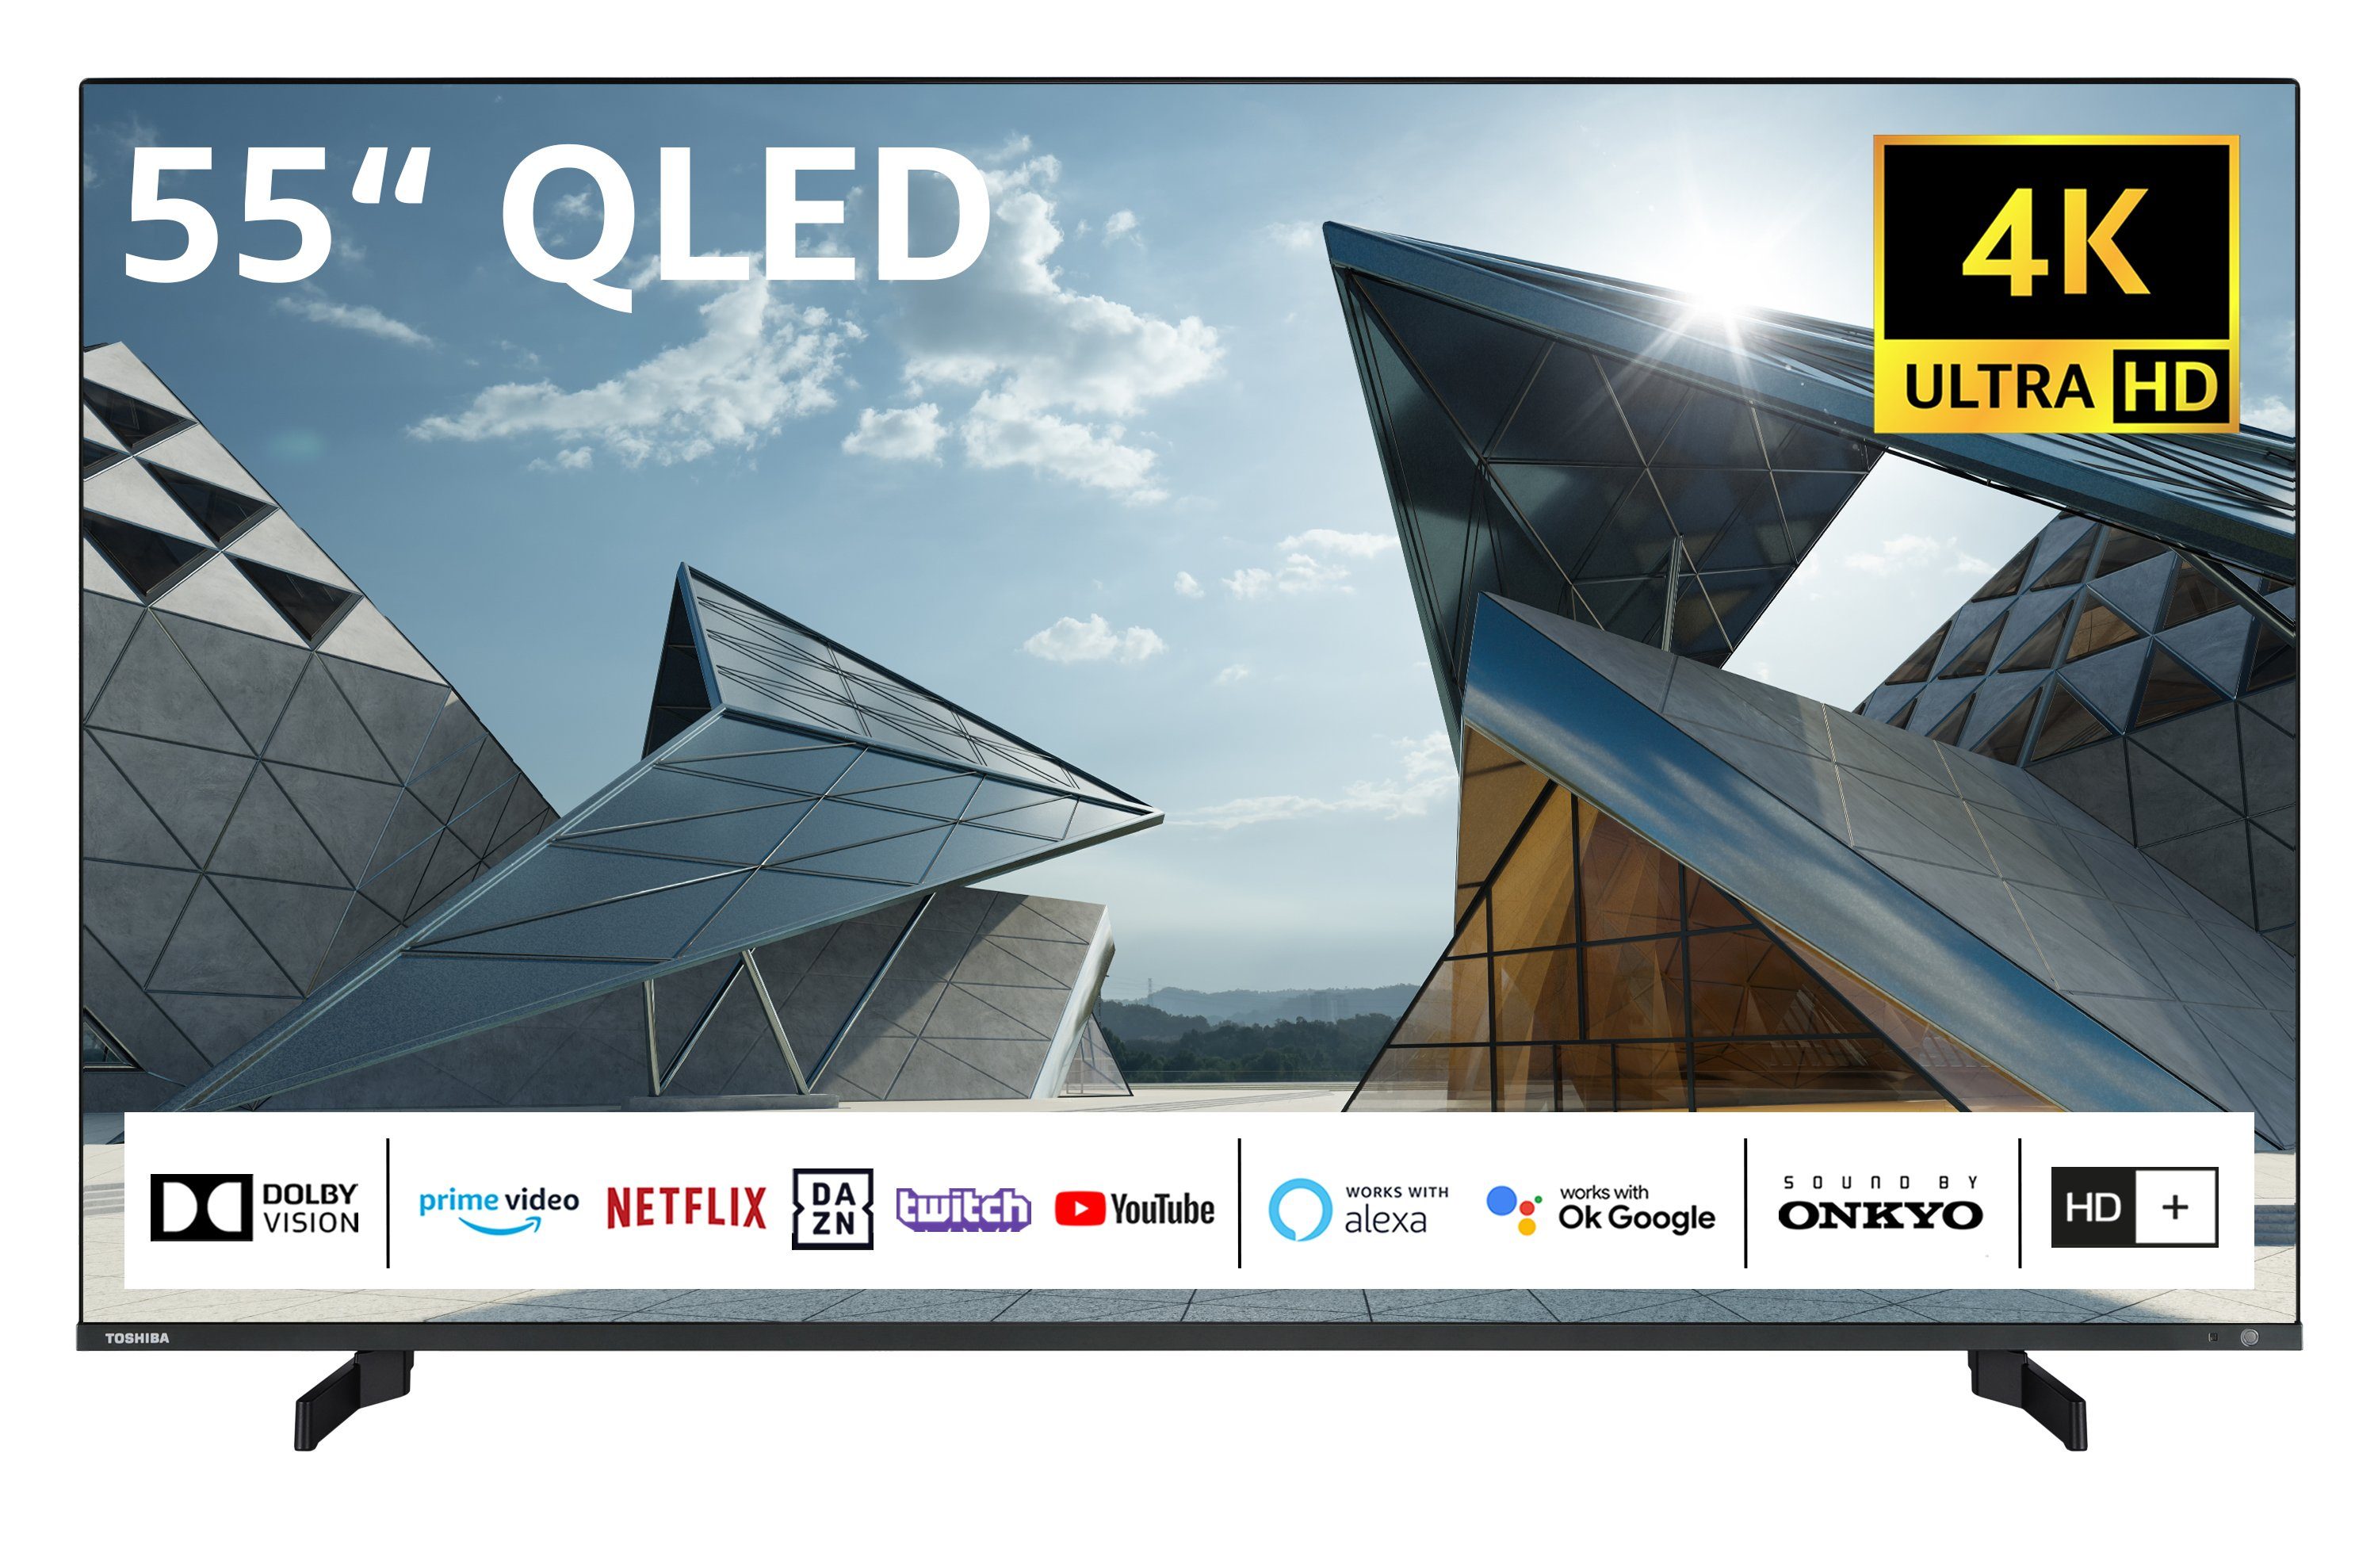 Toshiba 55QL5D63DAY 4K Dolby TV, 6 by (139 Monate HD, QLED-Fernseher HDR HD) Vision, Sound Onkyo Ultra Triple-Tuner, Zoll, Inkl. Smart - cm/55